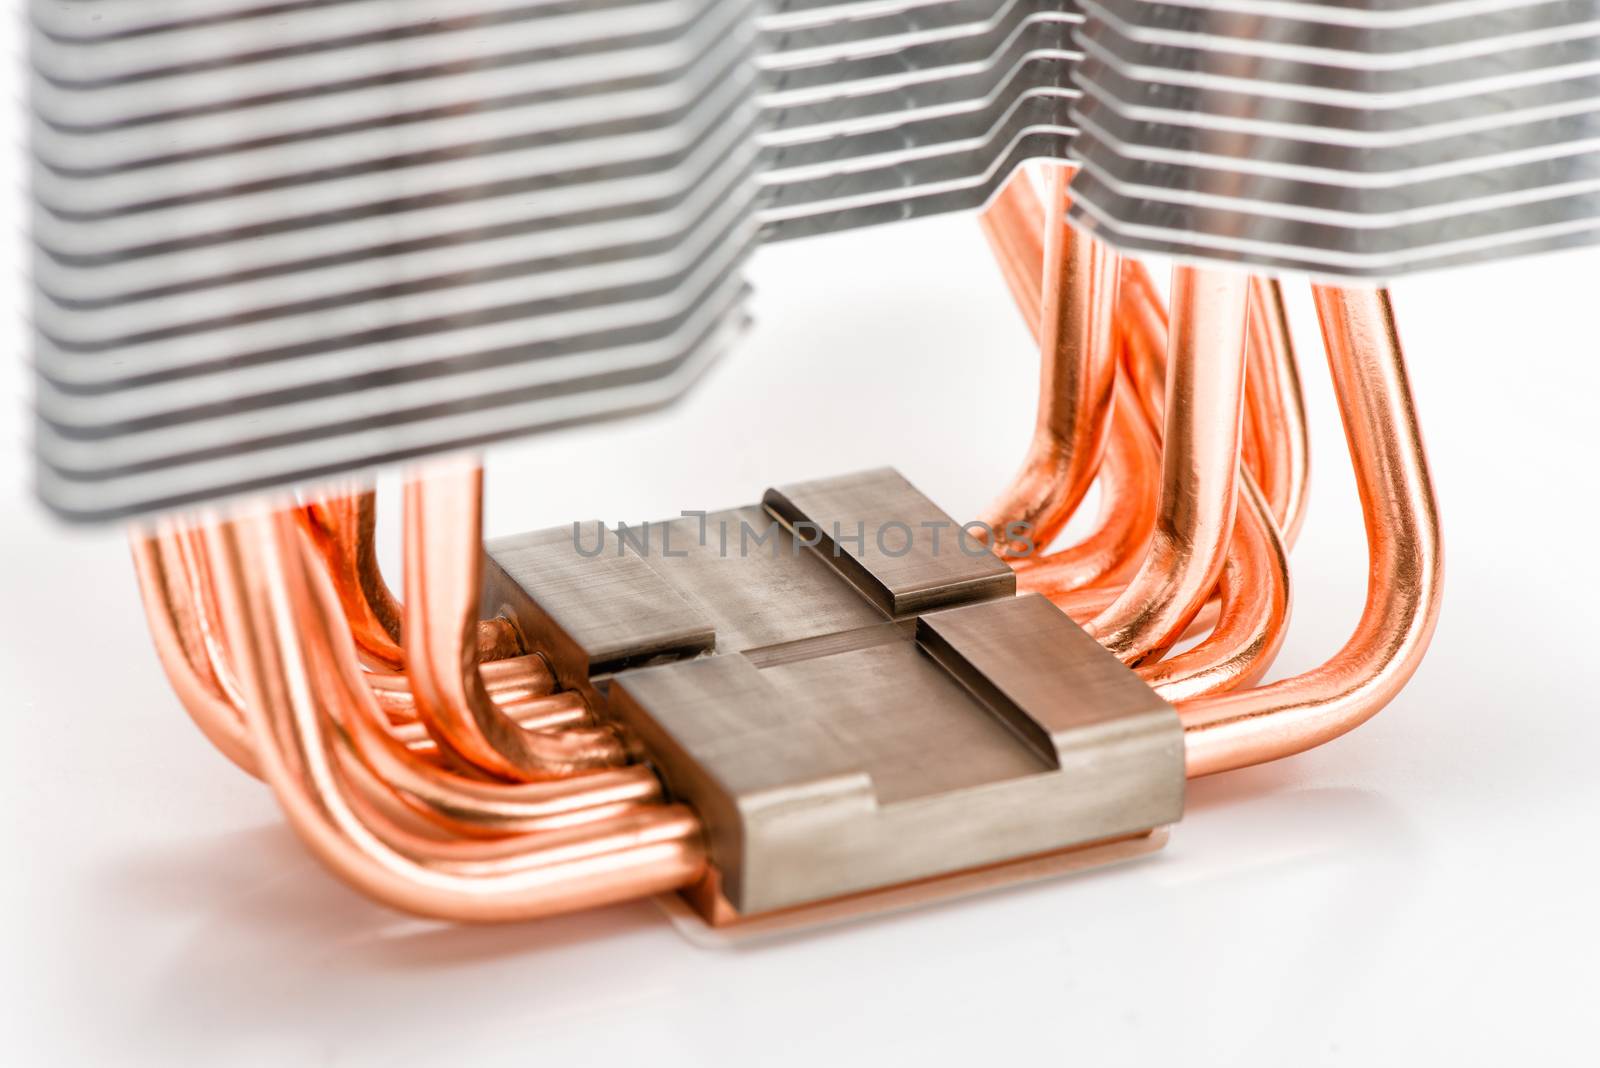 The base of the CPU cooler and the heat pipes